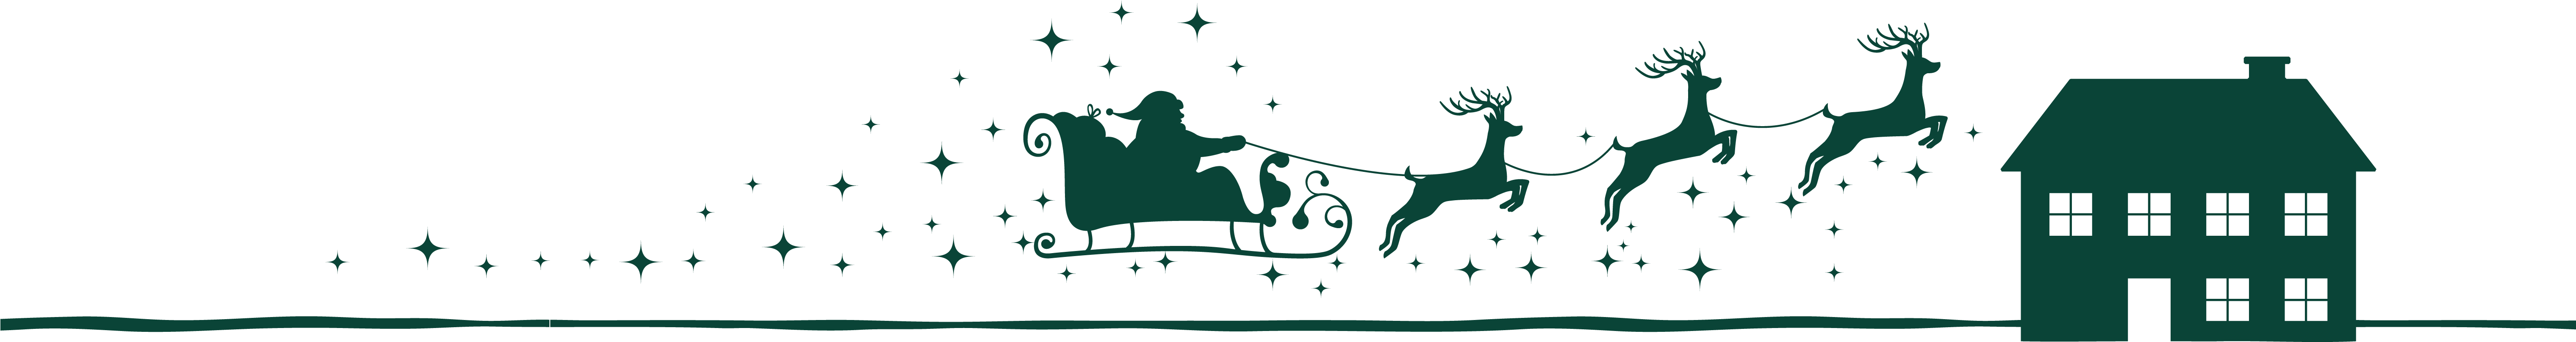 A House With Santa And His Reindeer Flying Over The - Silhouette (6080x1361), Png Download